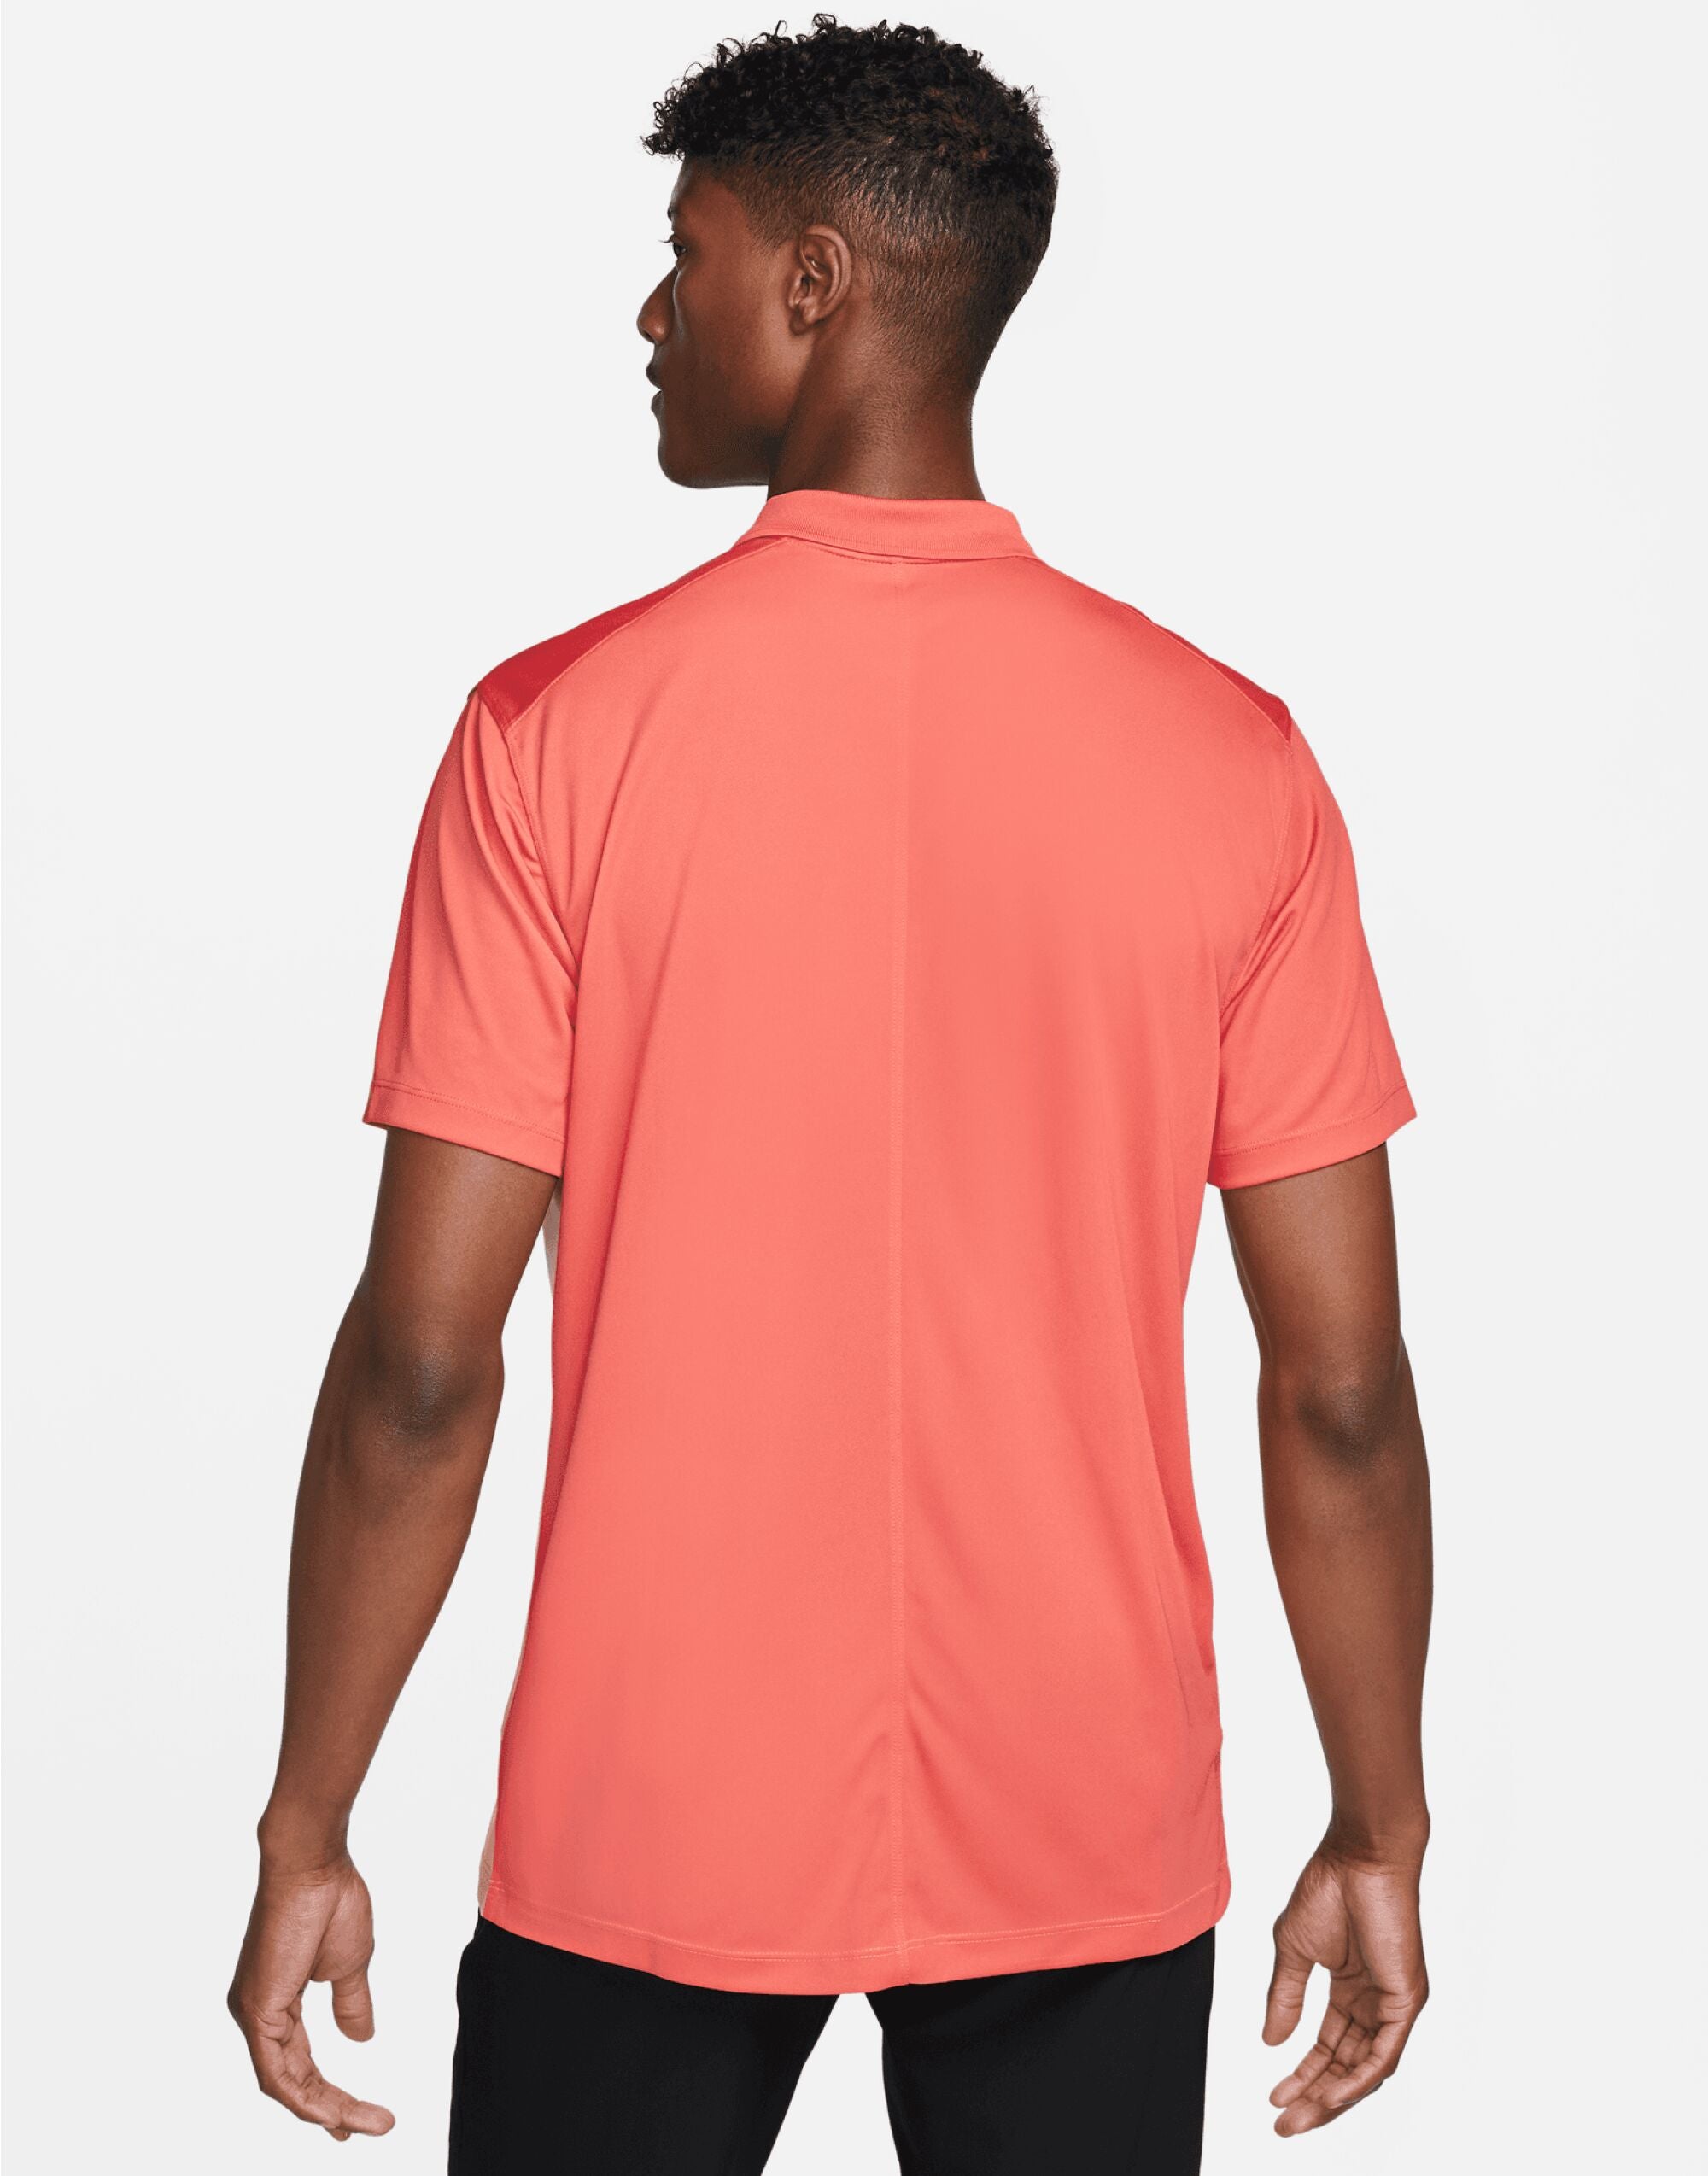 Nike Golf Dri-FIT Victory Colourblock Polo tecnology moved sweat away from your skin for quicker evaporation (DH0845)